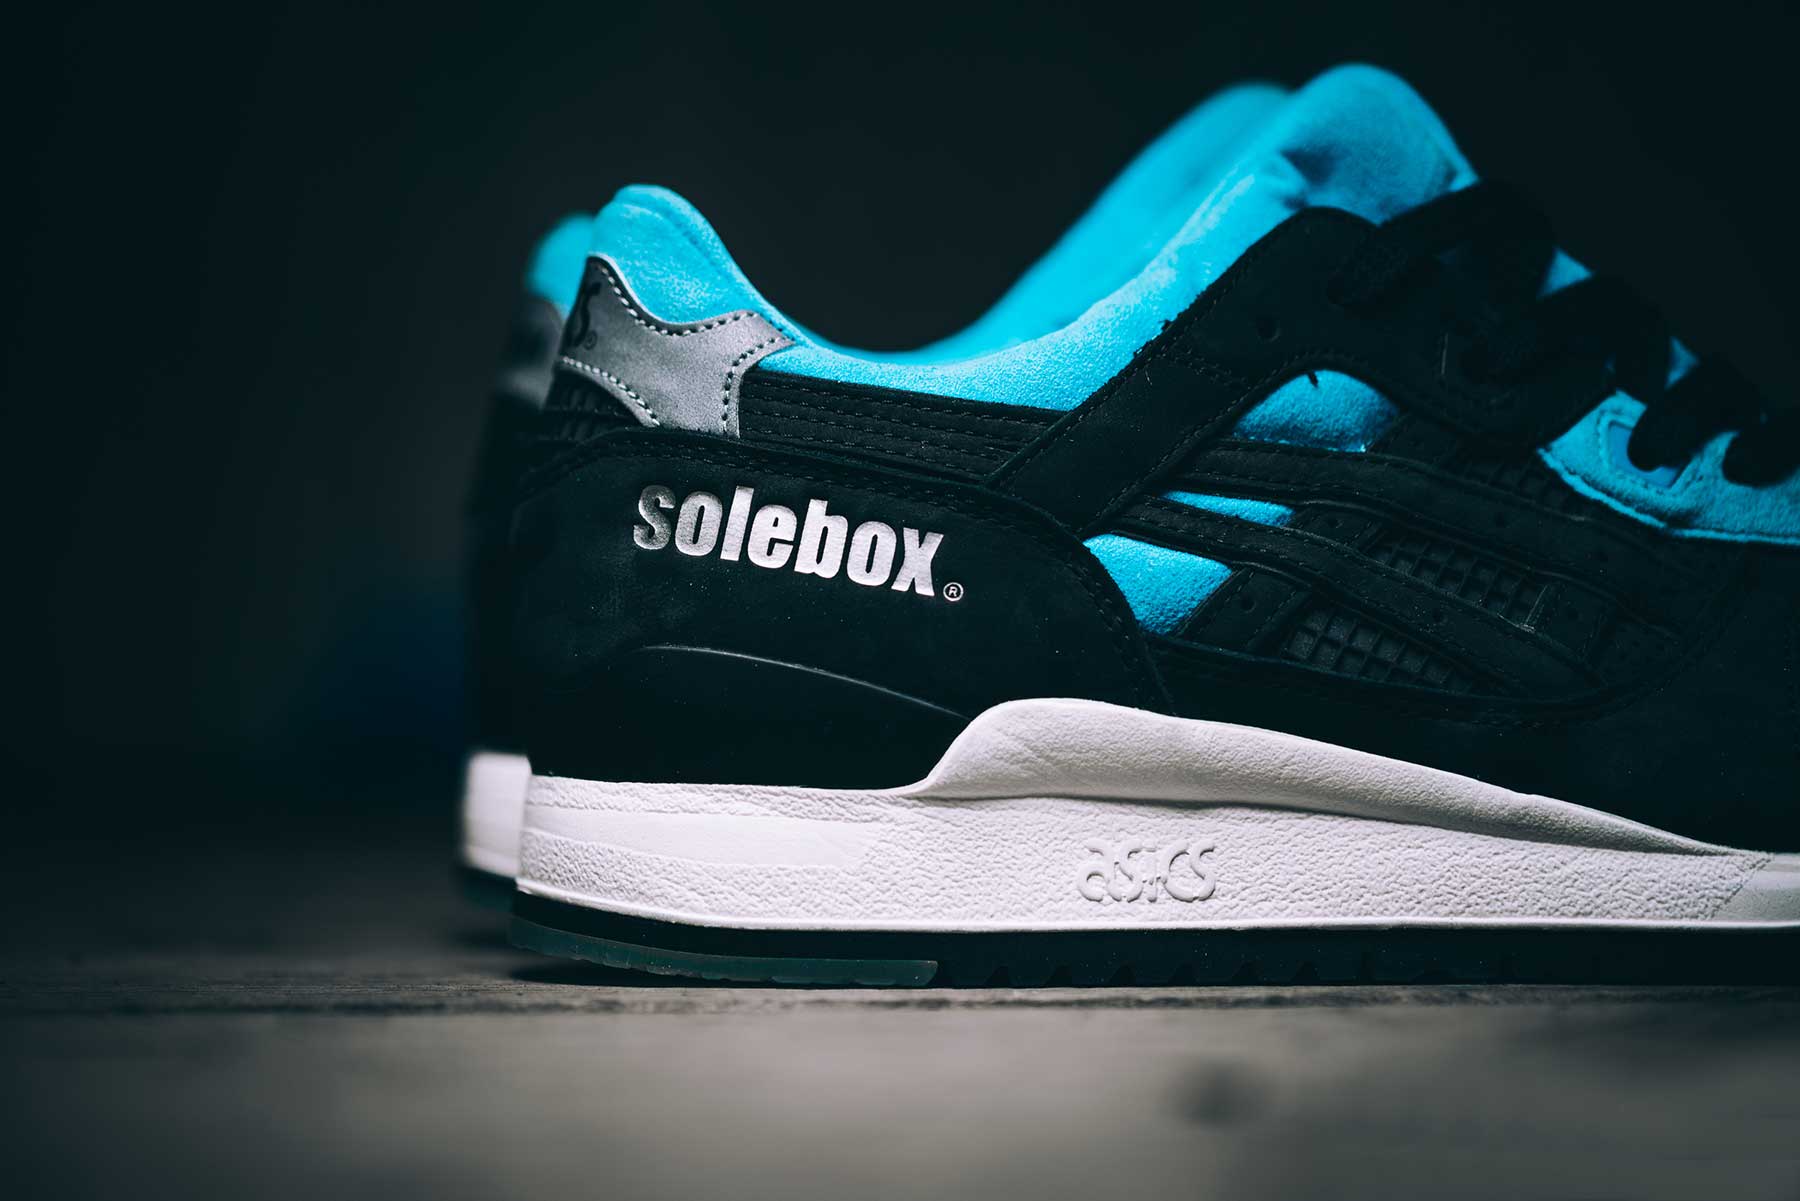 An unreleased Solebox x ASICS collaboration that was first seen in 2012 is finally getting the proper launch it deserves. The eye-catching color scheme gains its inspiration from a species of blue bees that are native to Southeast Asia.